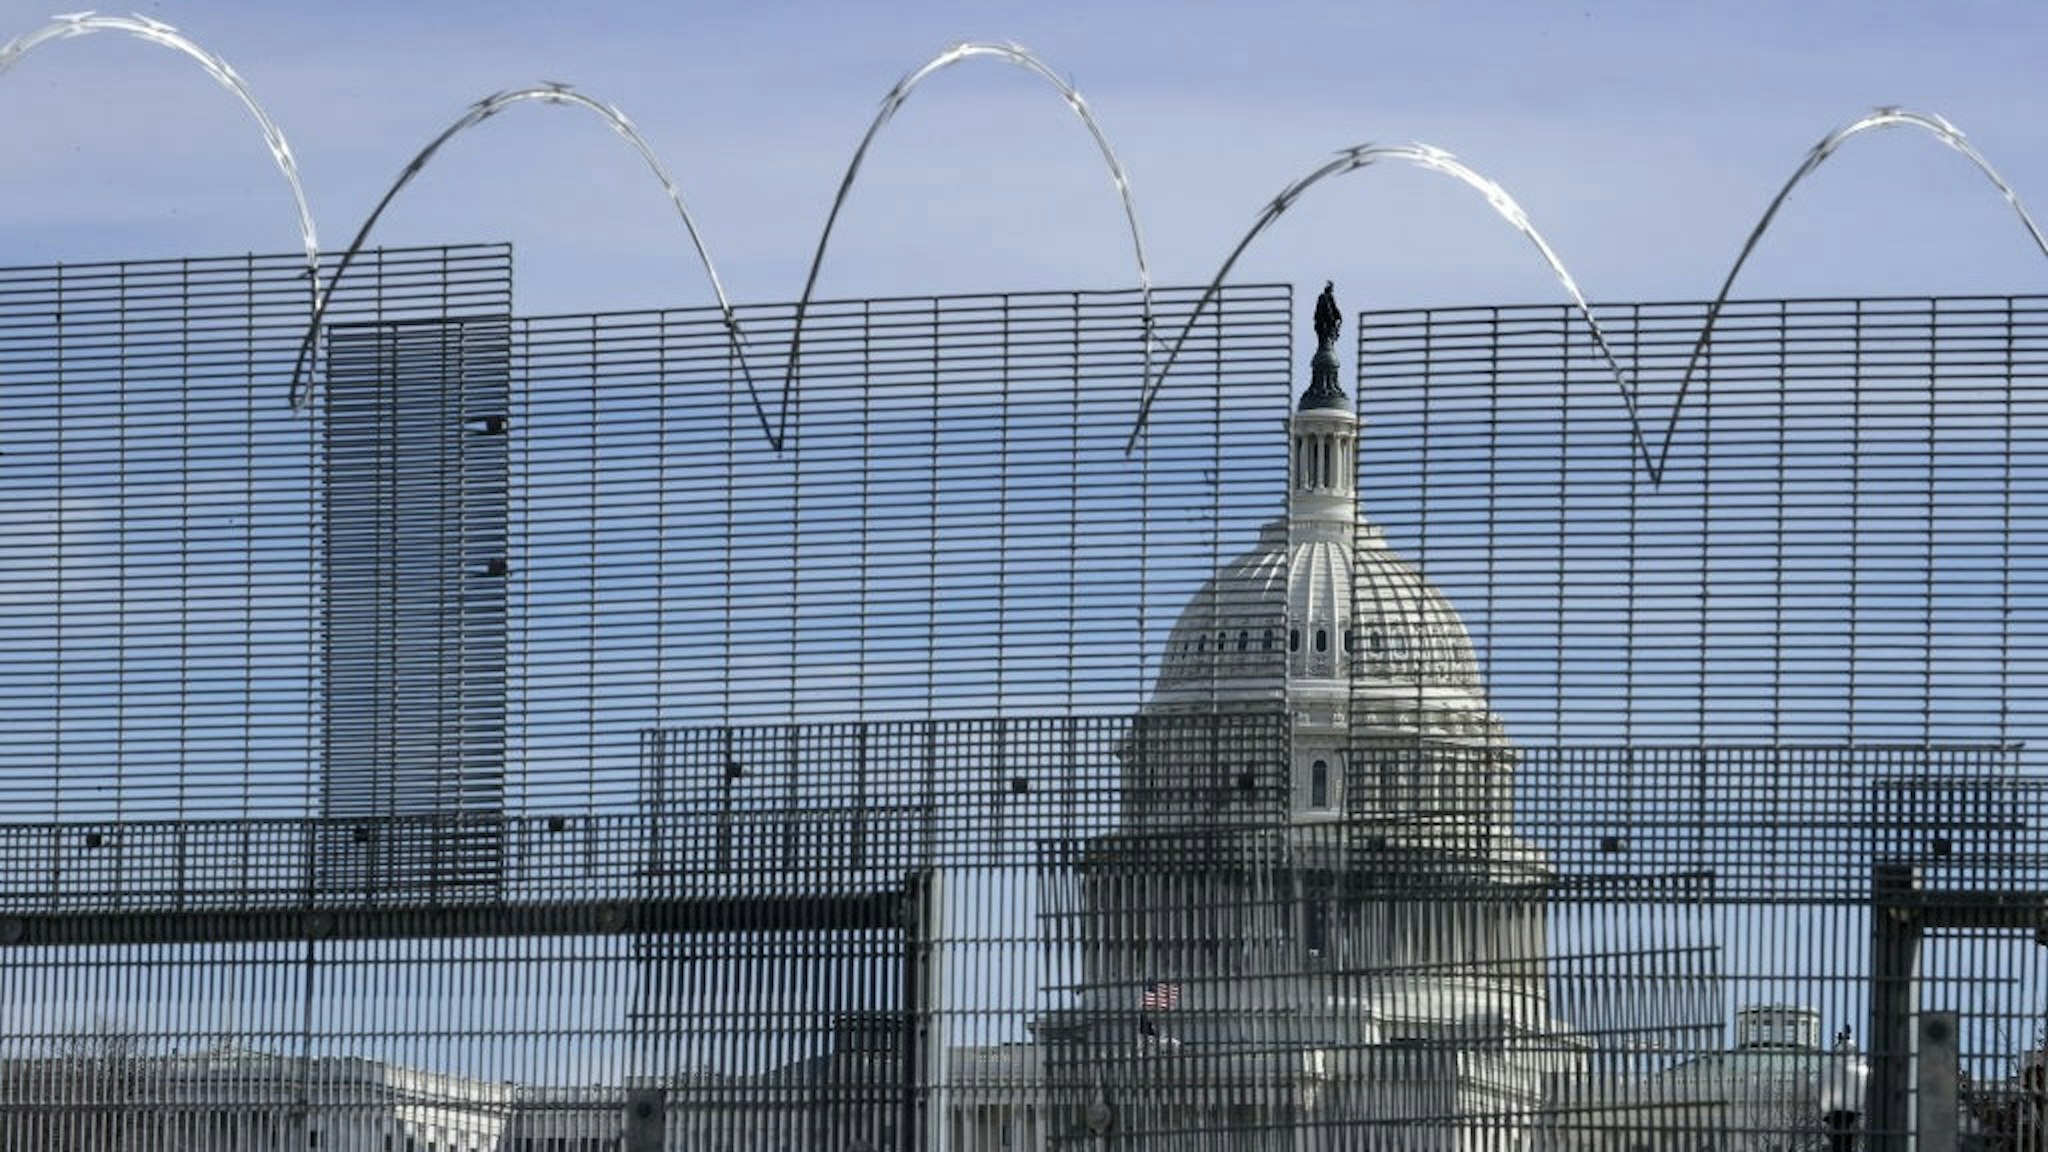 WASHINGTON, DC - FEBRUARY 17: A temporary security fence topped with concertina razor wire surrounds the U.S. Capitol on February 17, 2021 in Washington, DC. The fence was erected around the Capitol, the Supreme Court, the Library of Congress and their associated office buildings following the deadly January 6 insurrection, where thousands of supporters of former President Donald Trump stormed the Capitol in an attempt to halt certification of the 2020 presidential election results. (Photo by Chip Somodevilla/Getty Images)